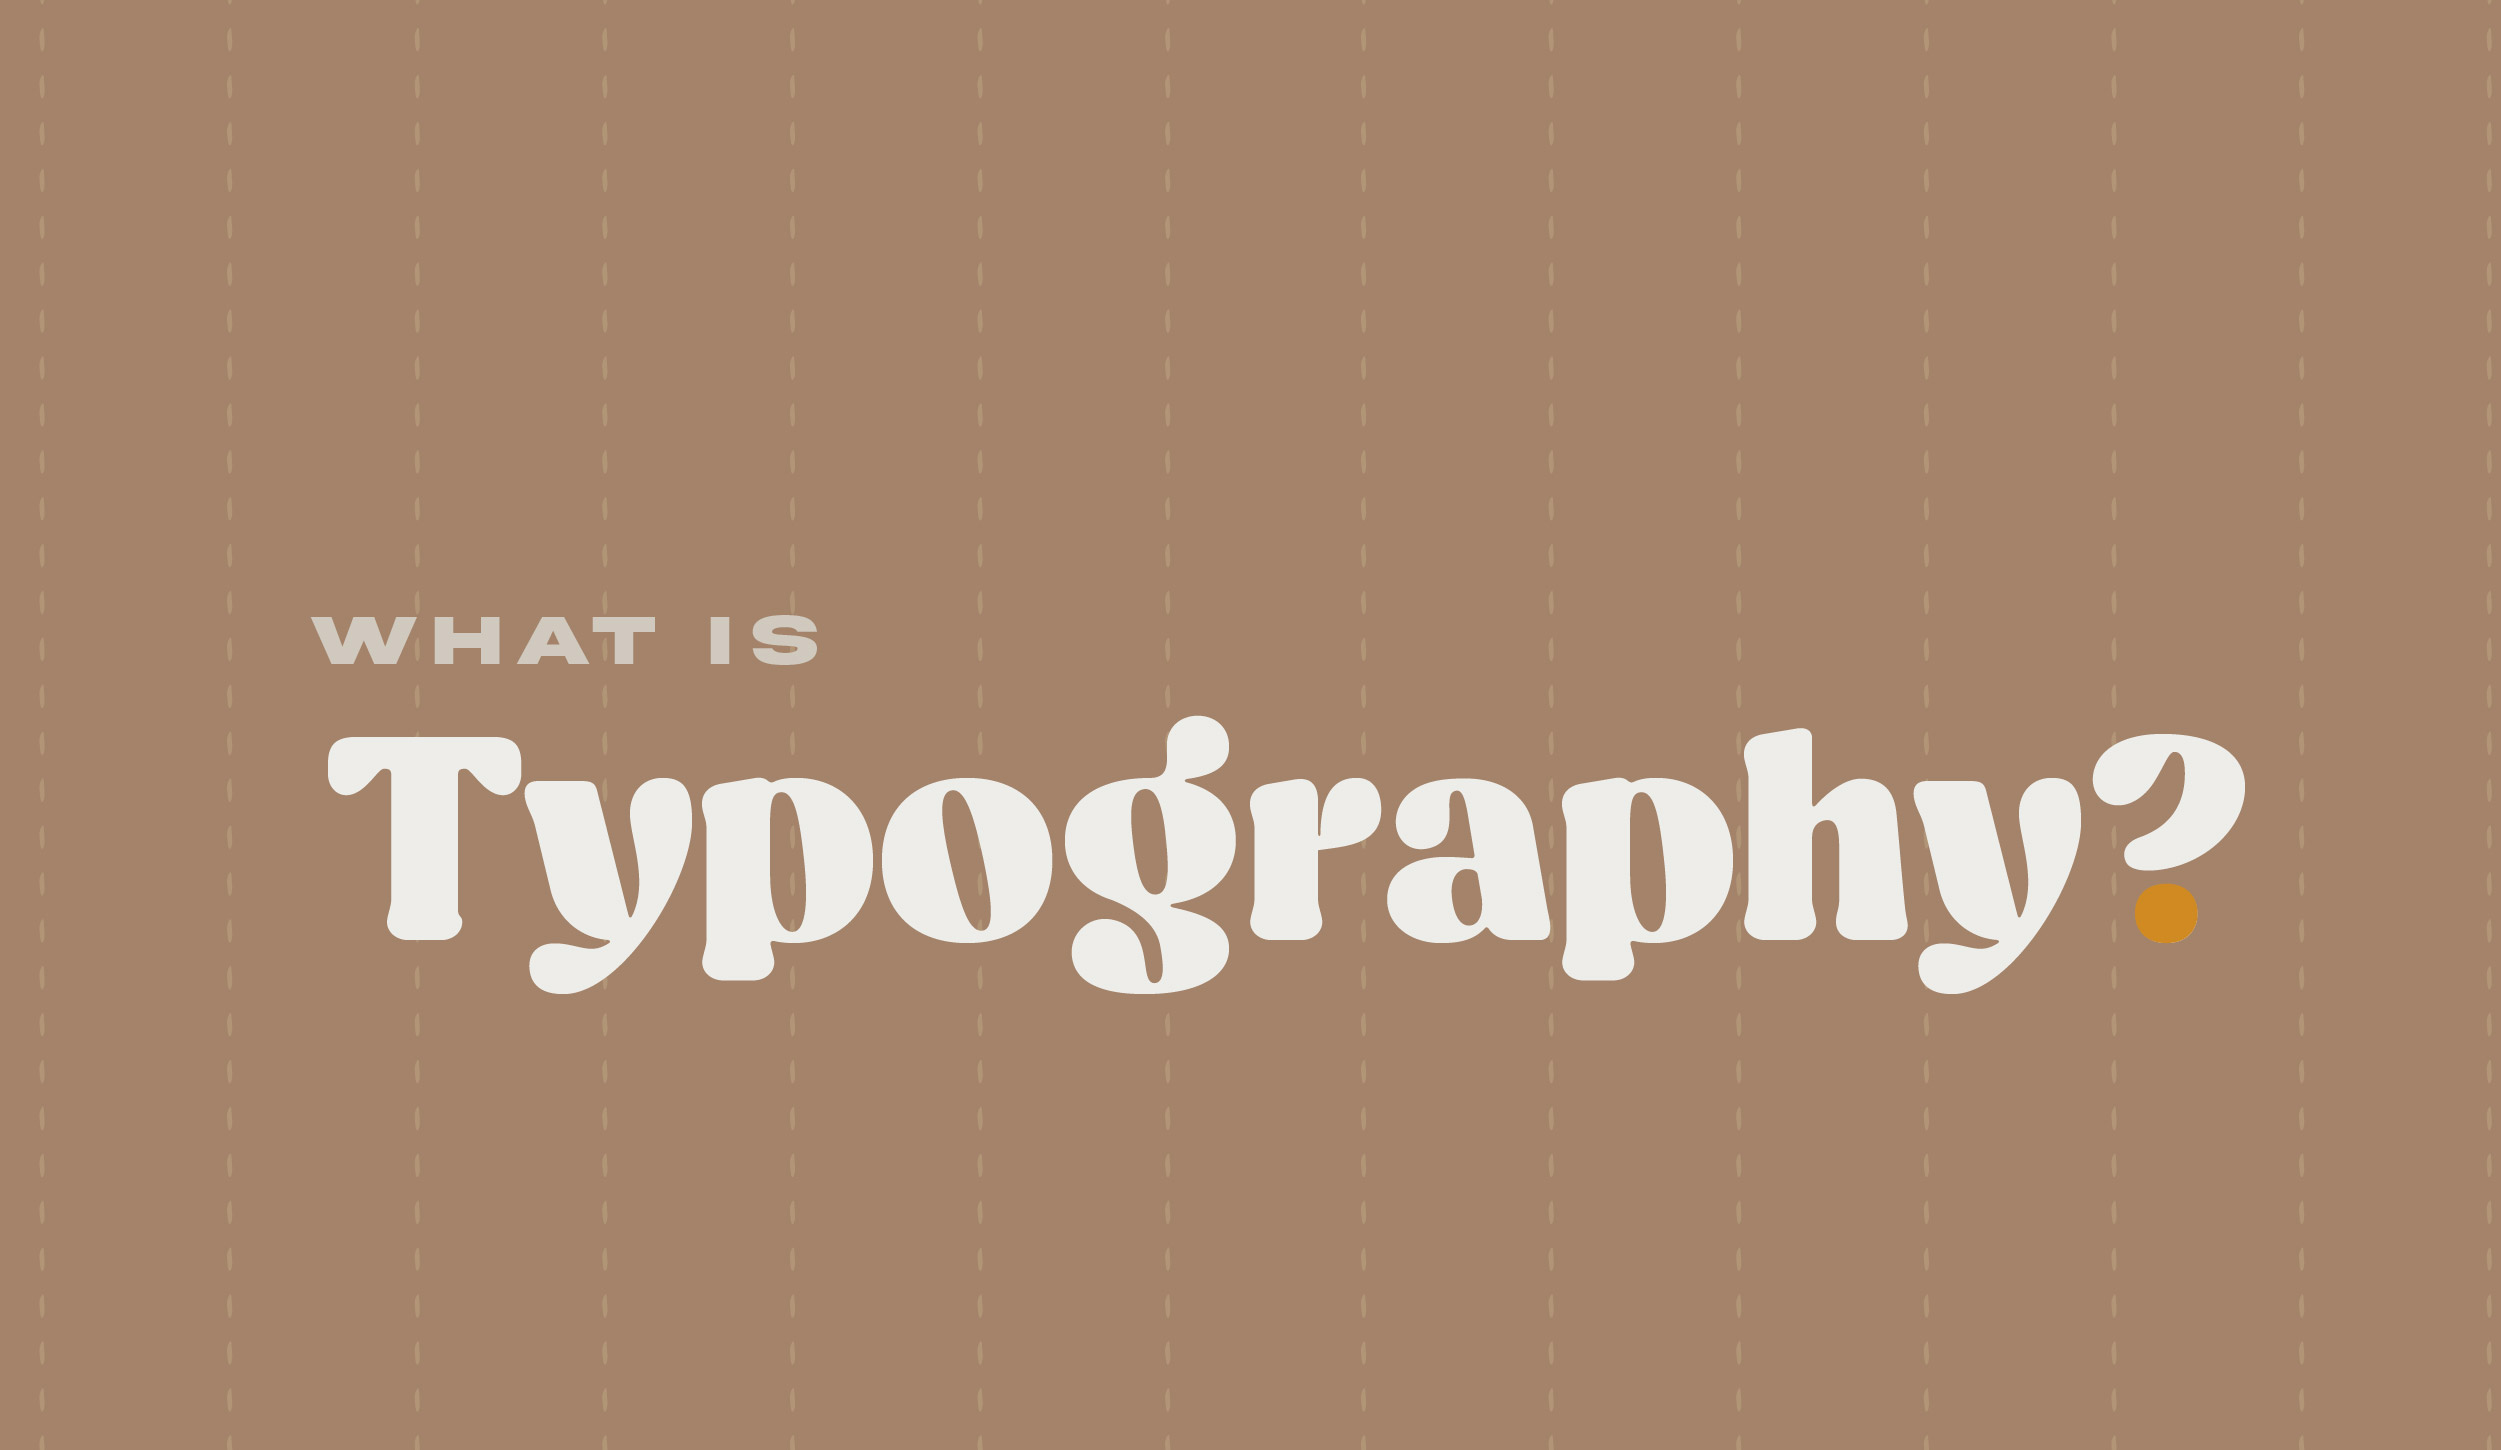 What is typography 